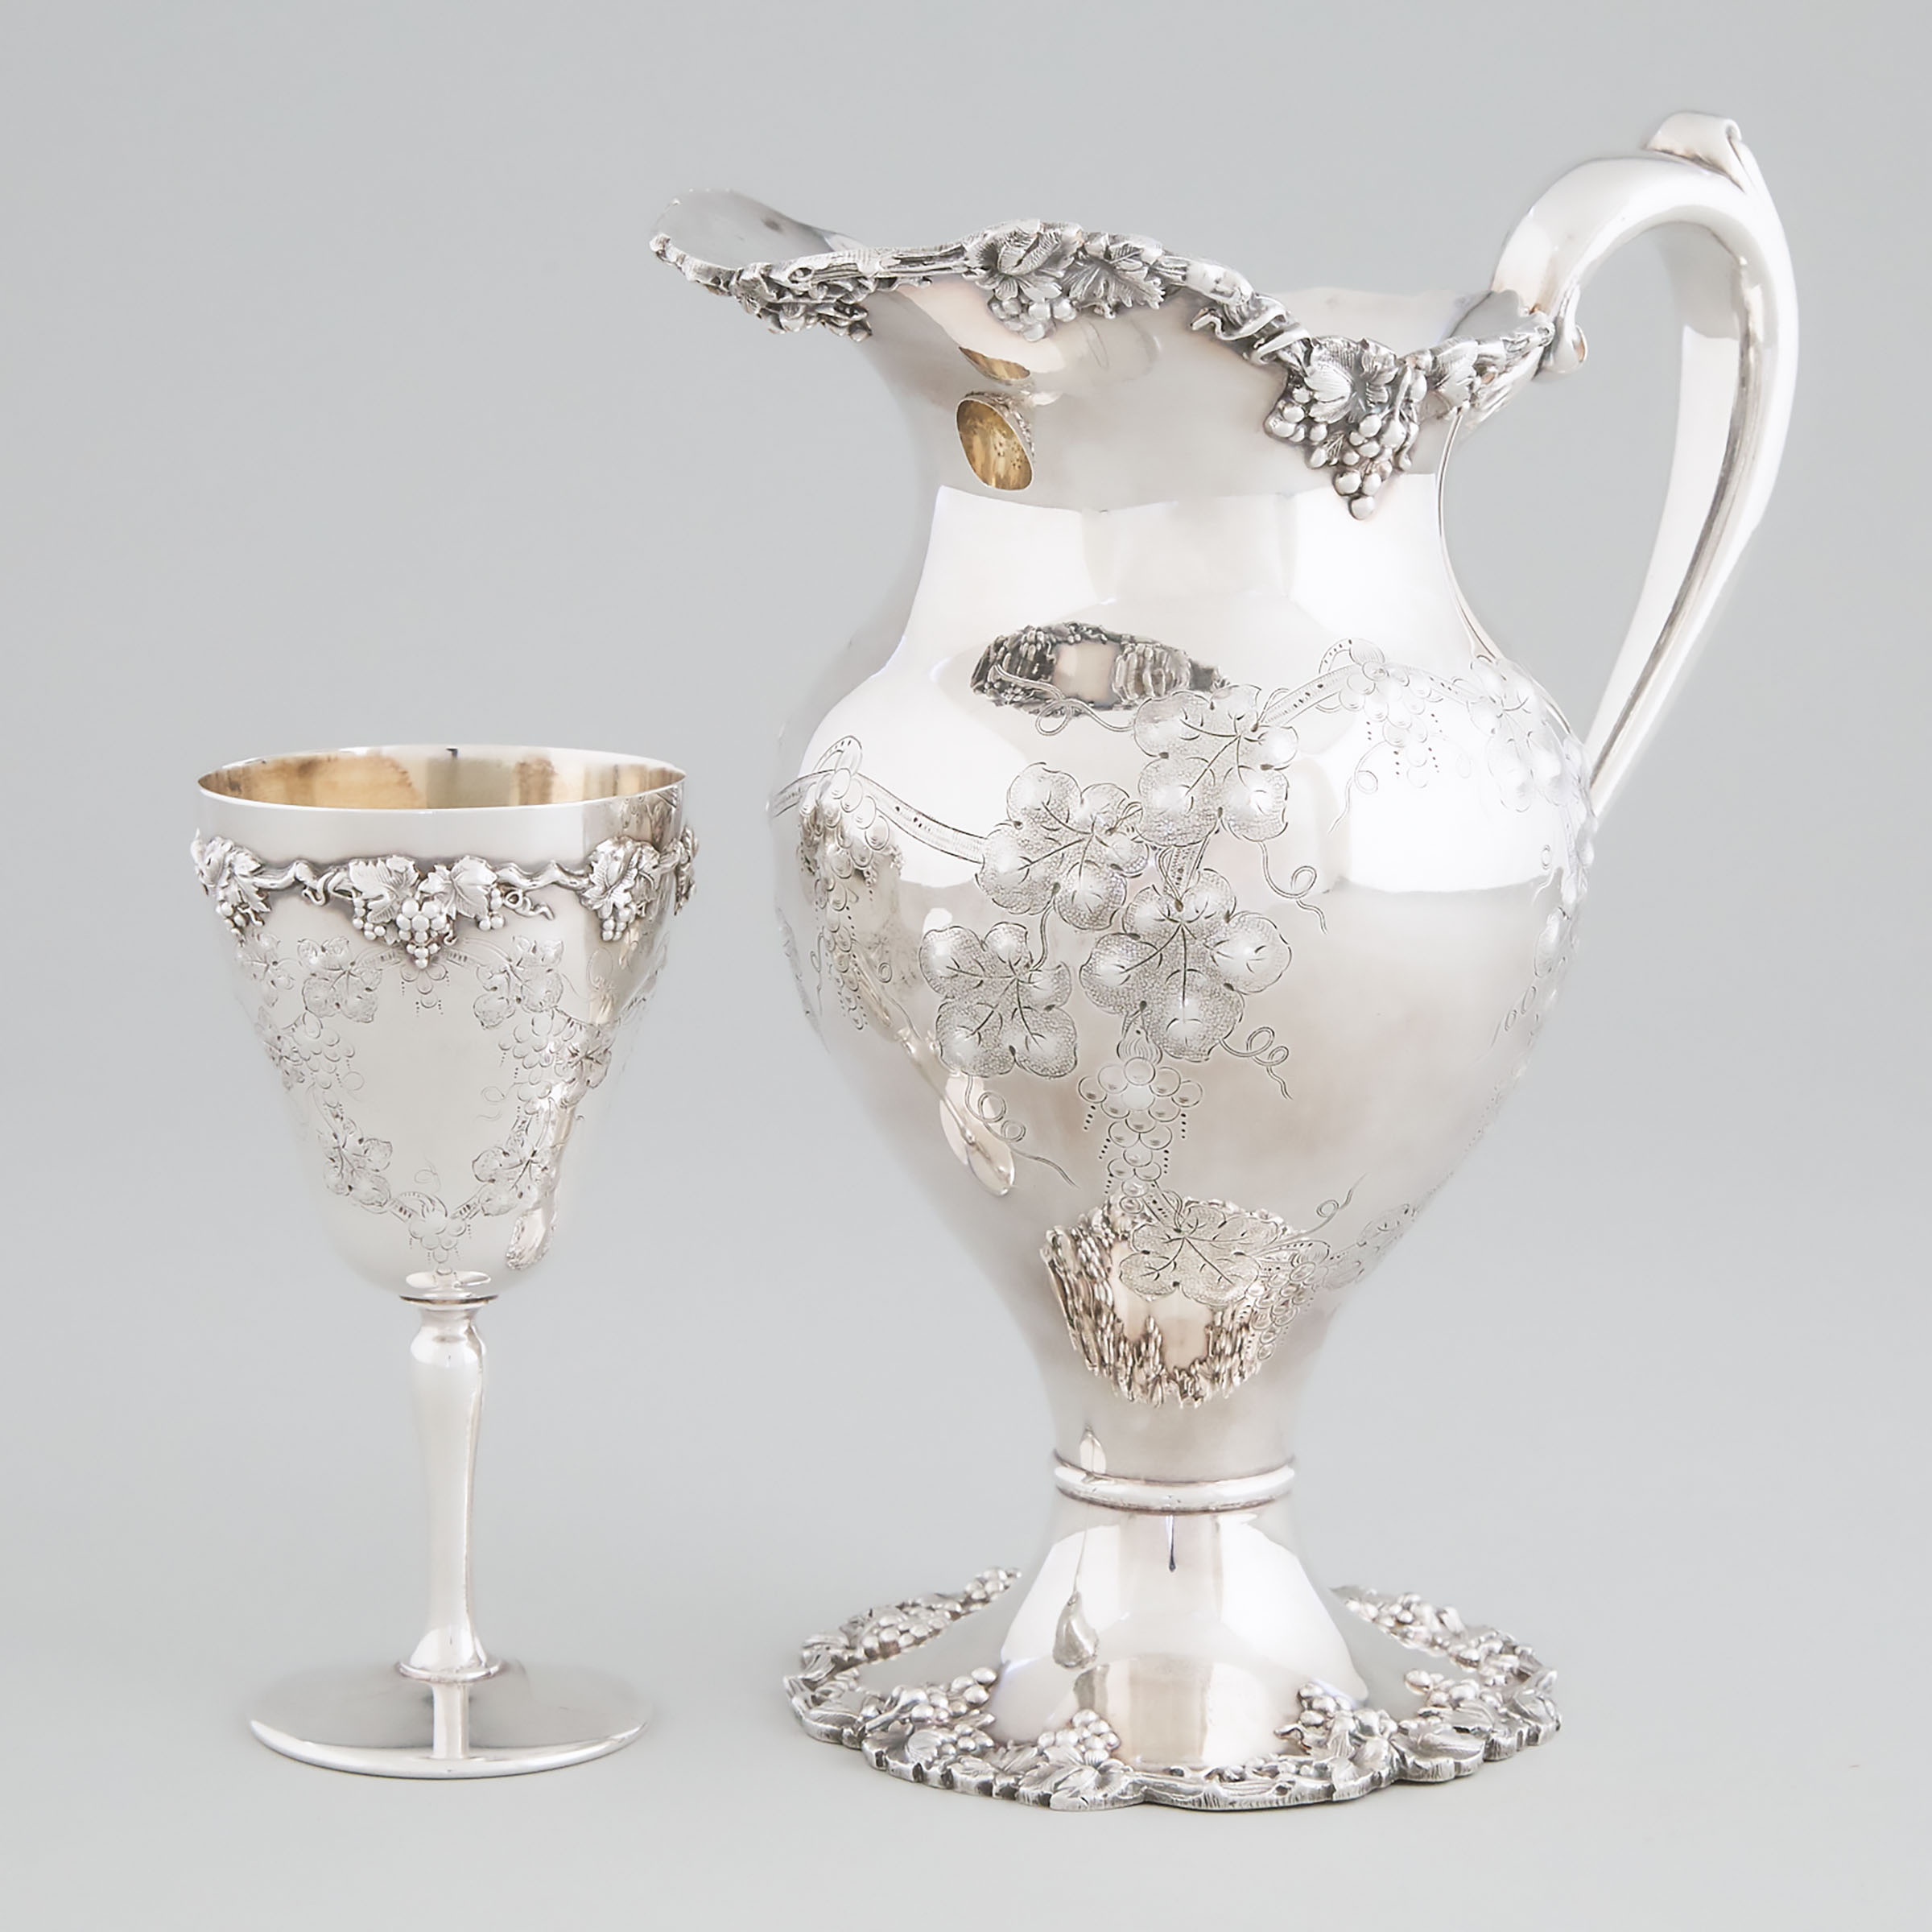 American Silver Plated Pitcher and Goblet, 20th century